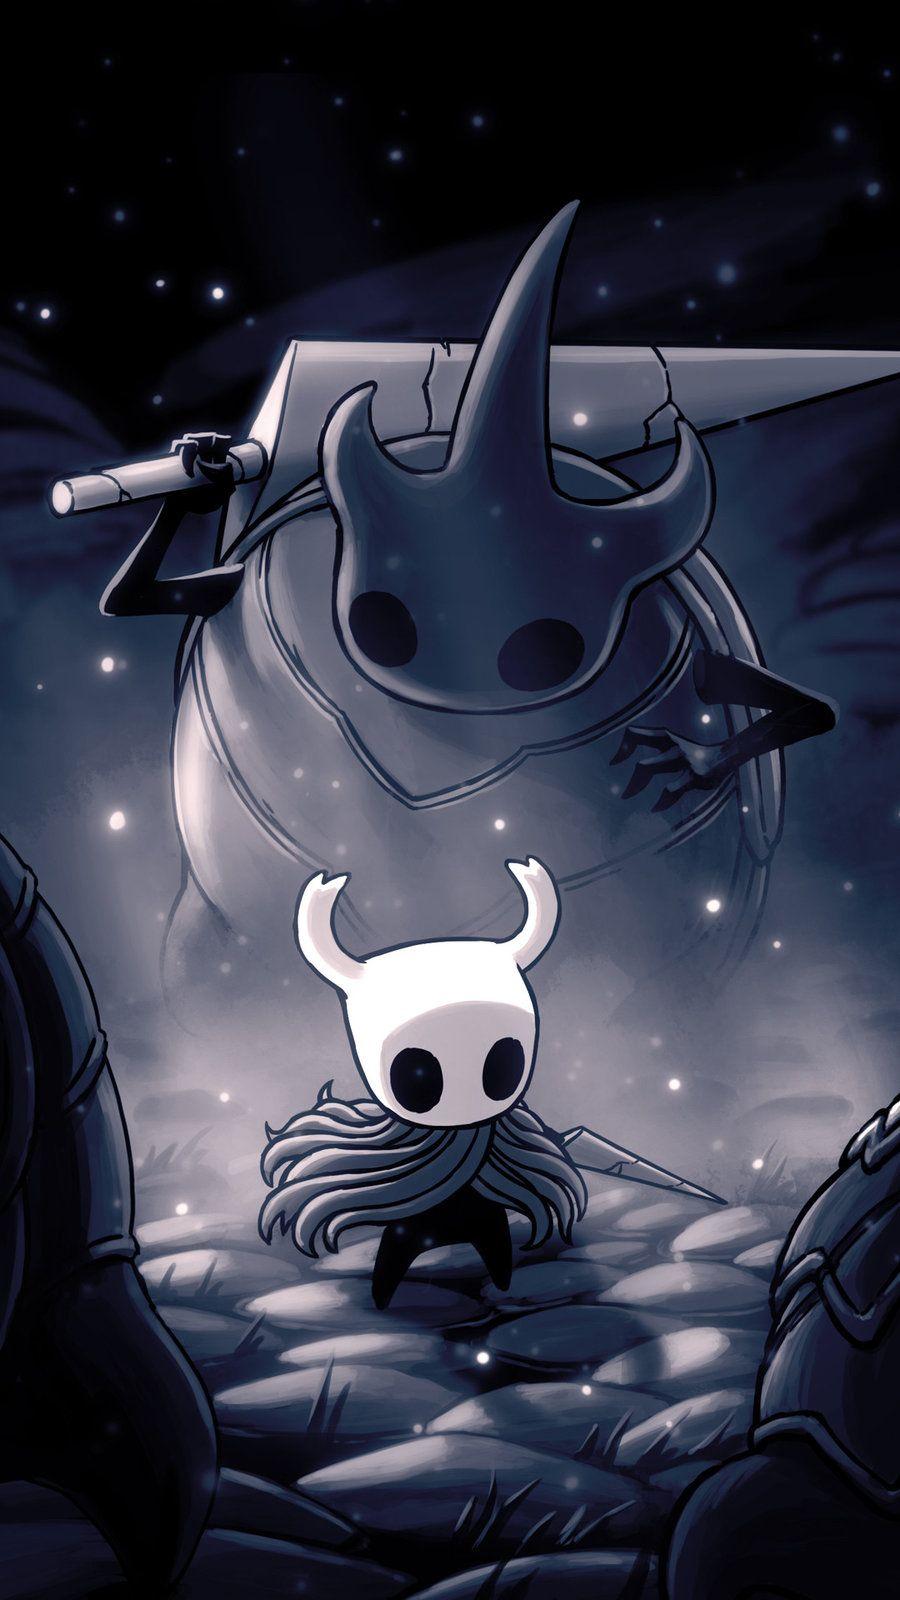 Hollow Knight Wallpapers by teamcherry